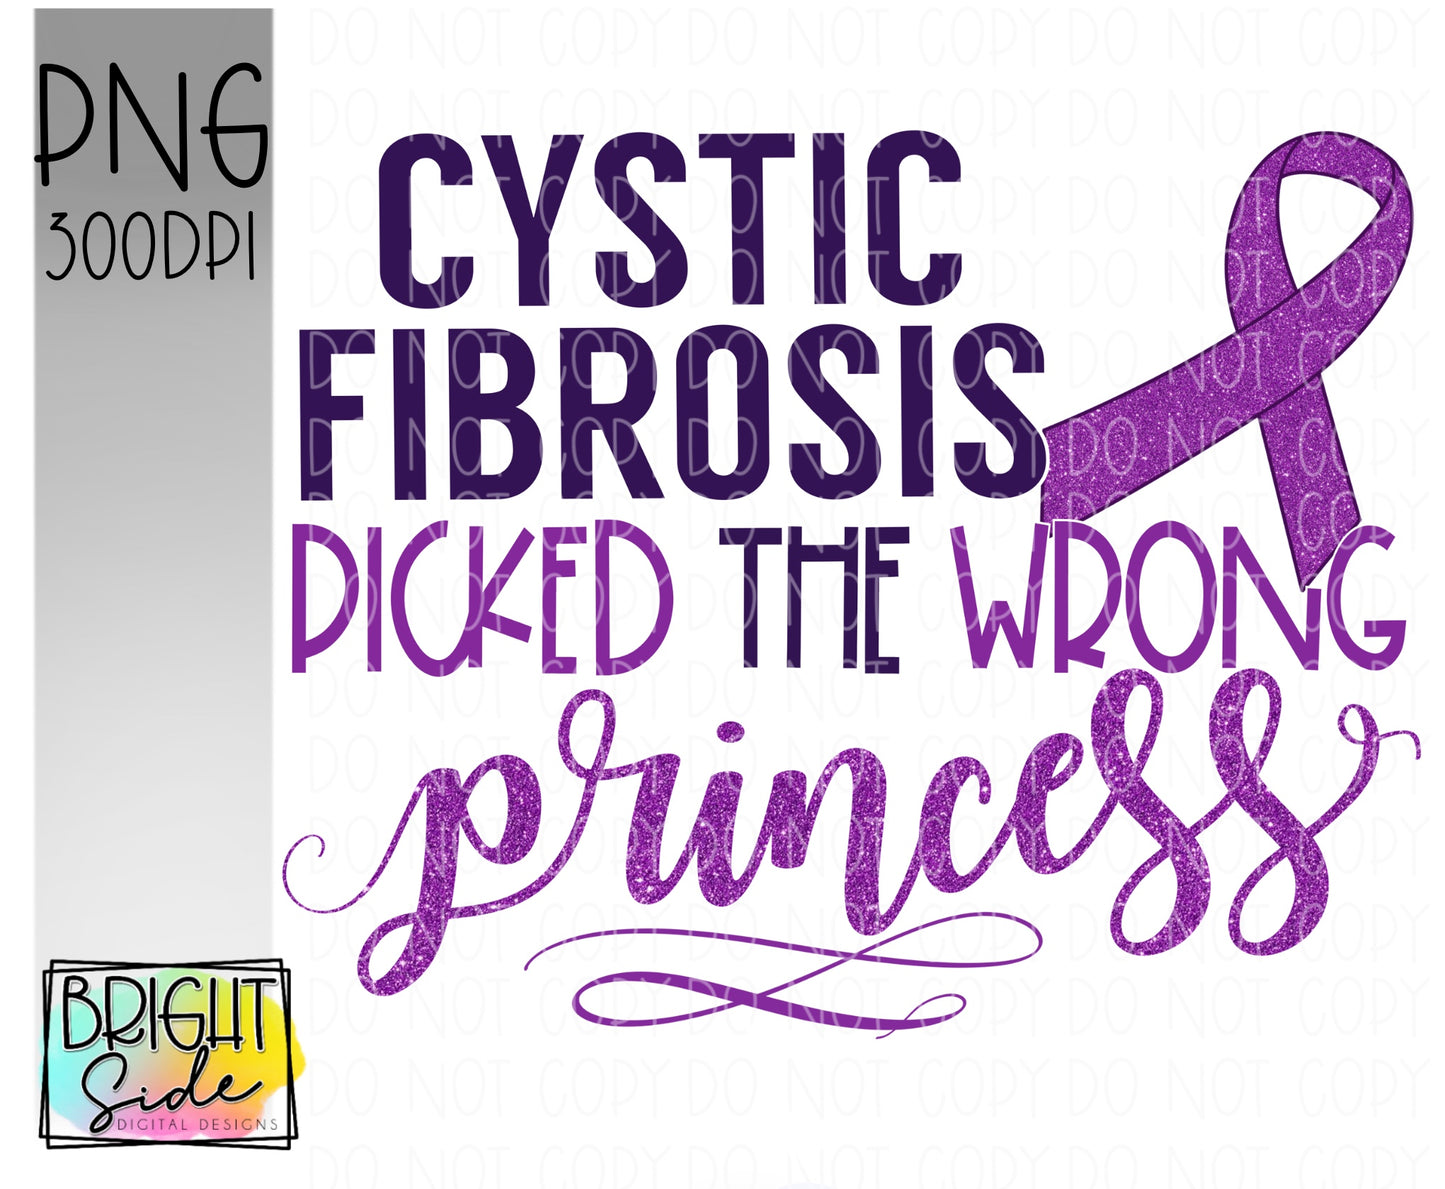 Cystic Fibrosis picked the wrong princess